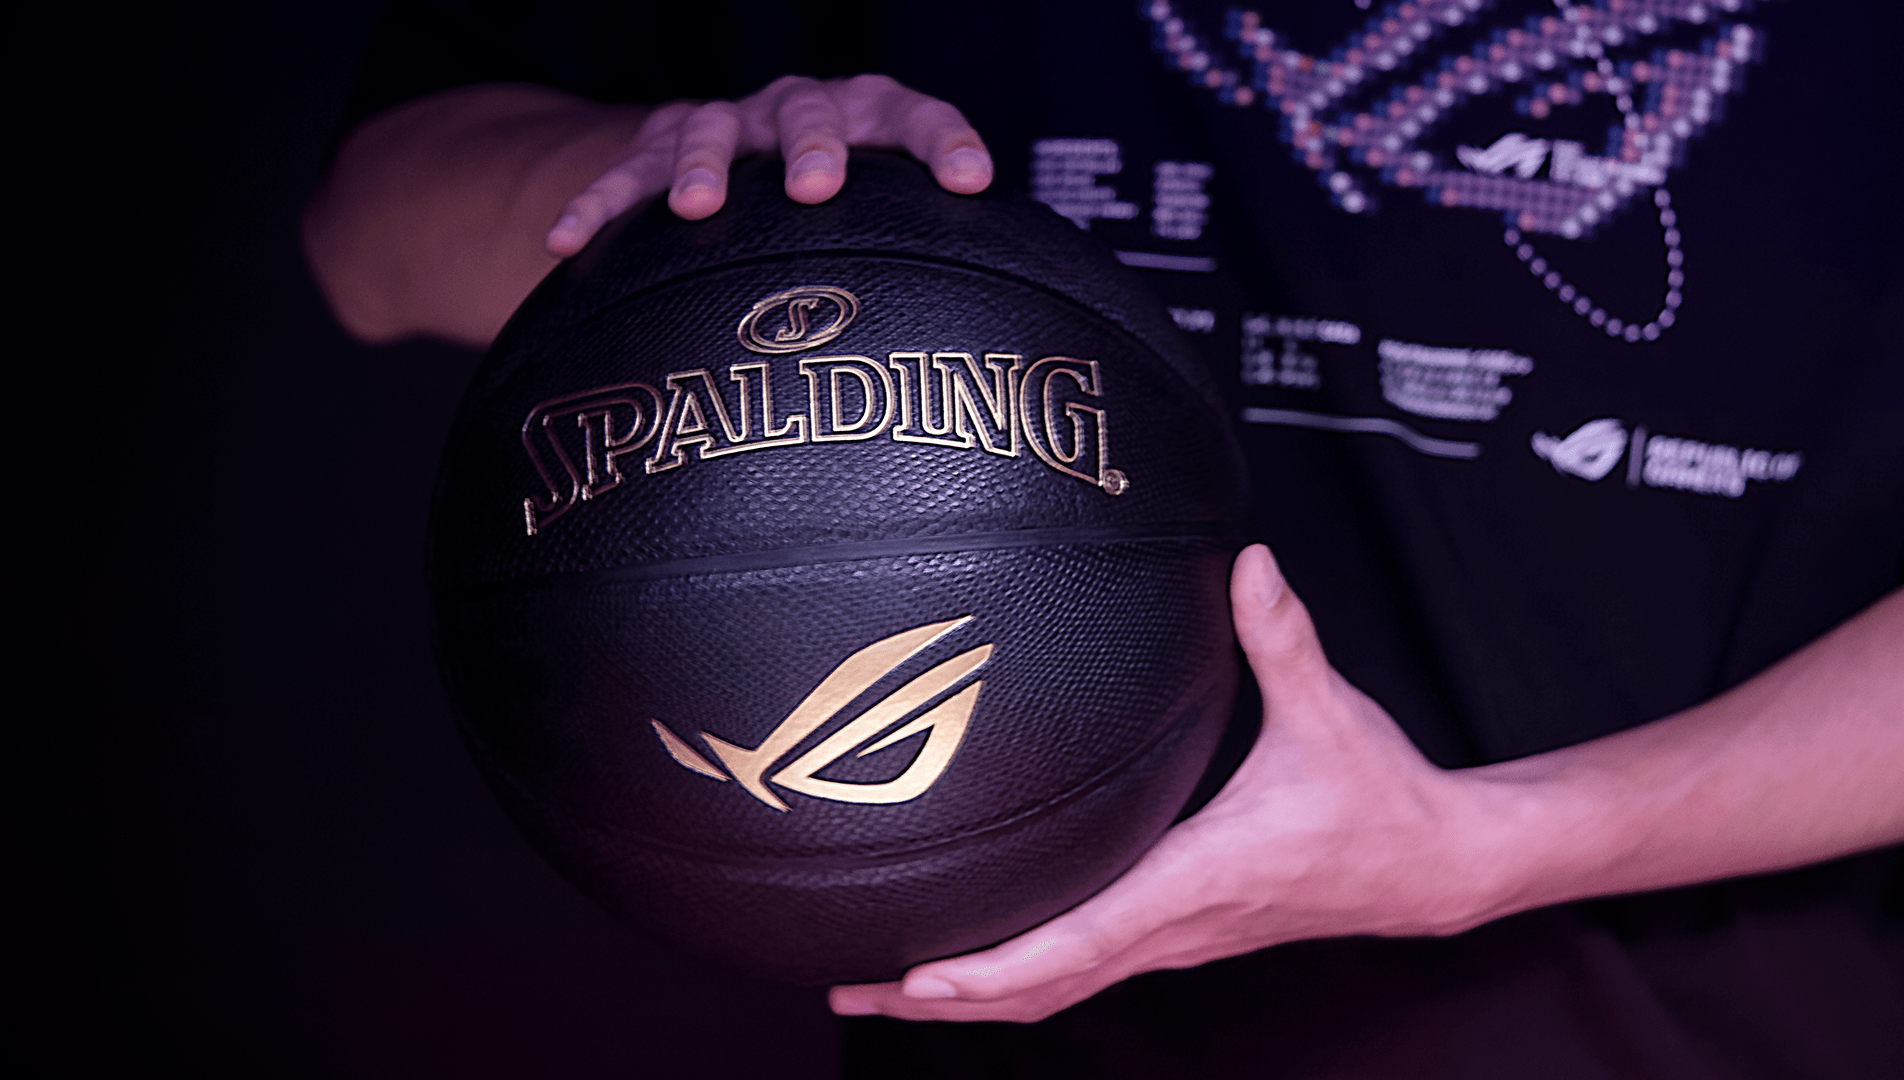 Discounts for teachers and college students on Spalding basketballs, apparel, training equipment, and more.